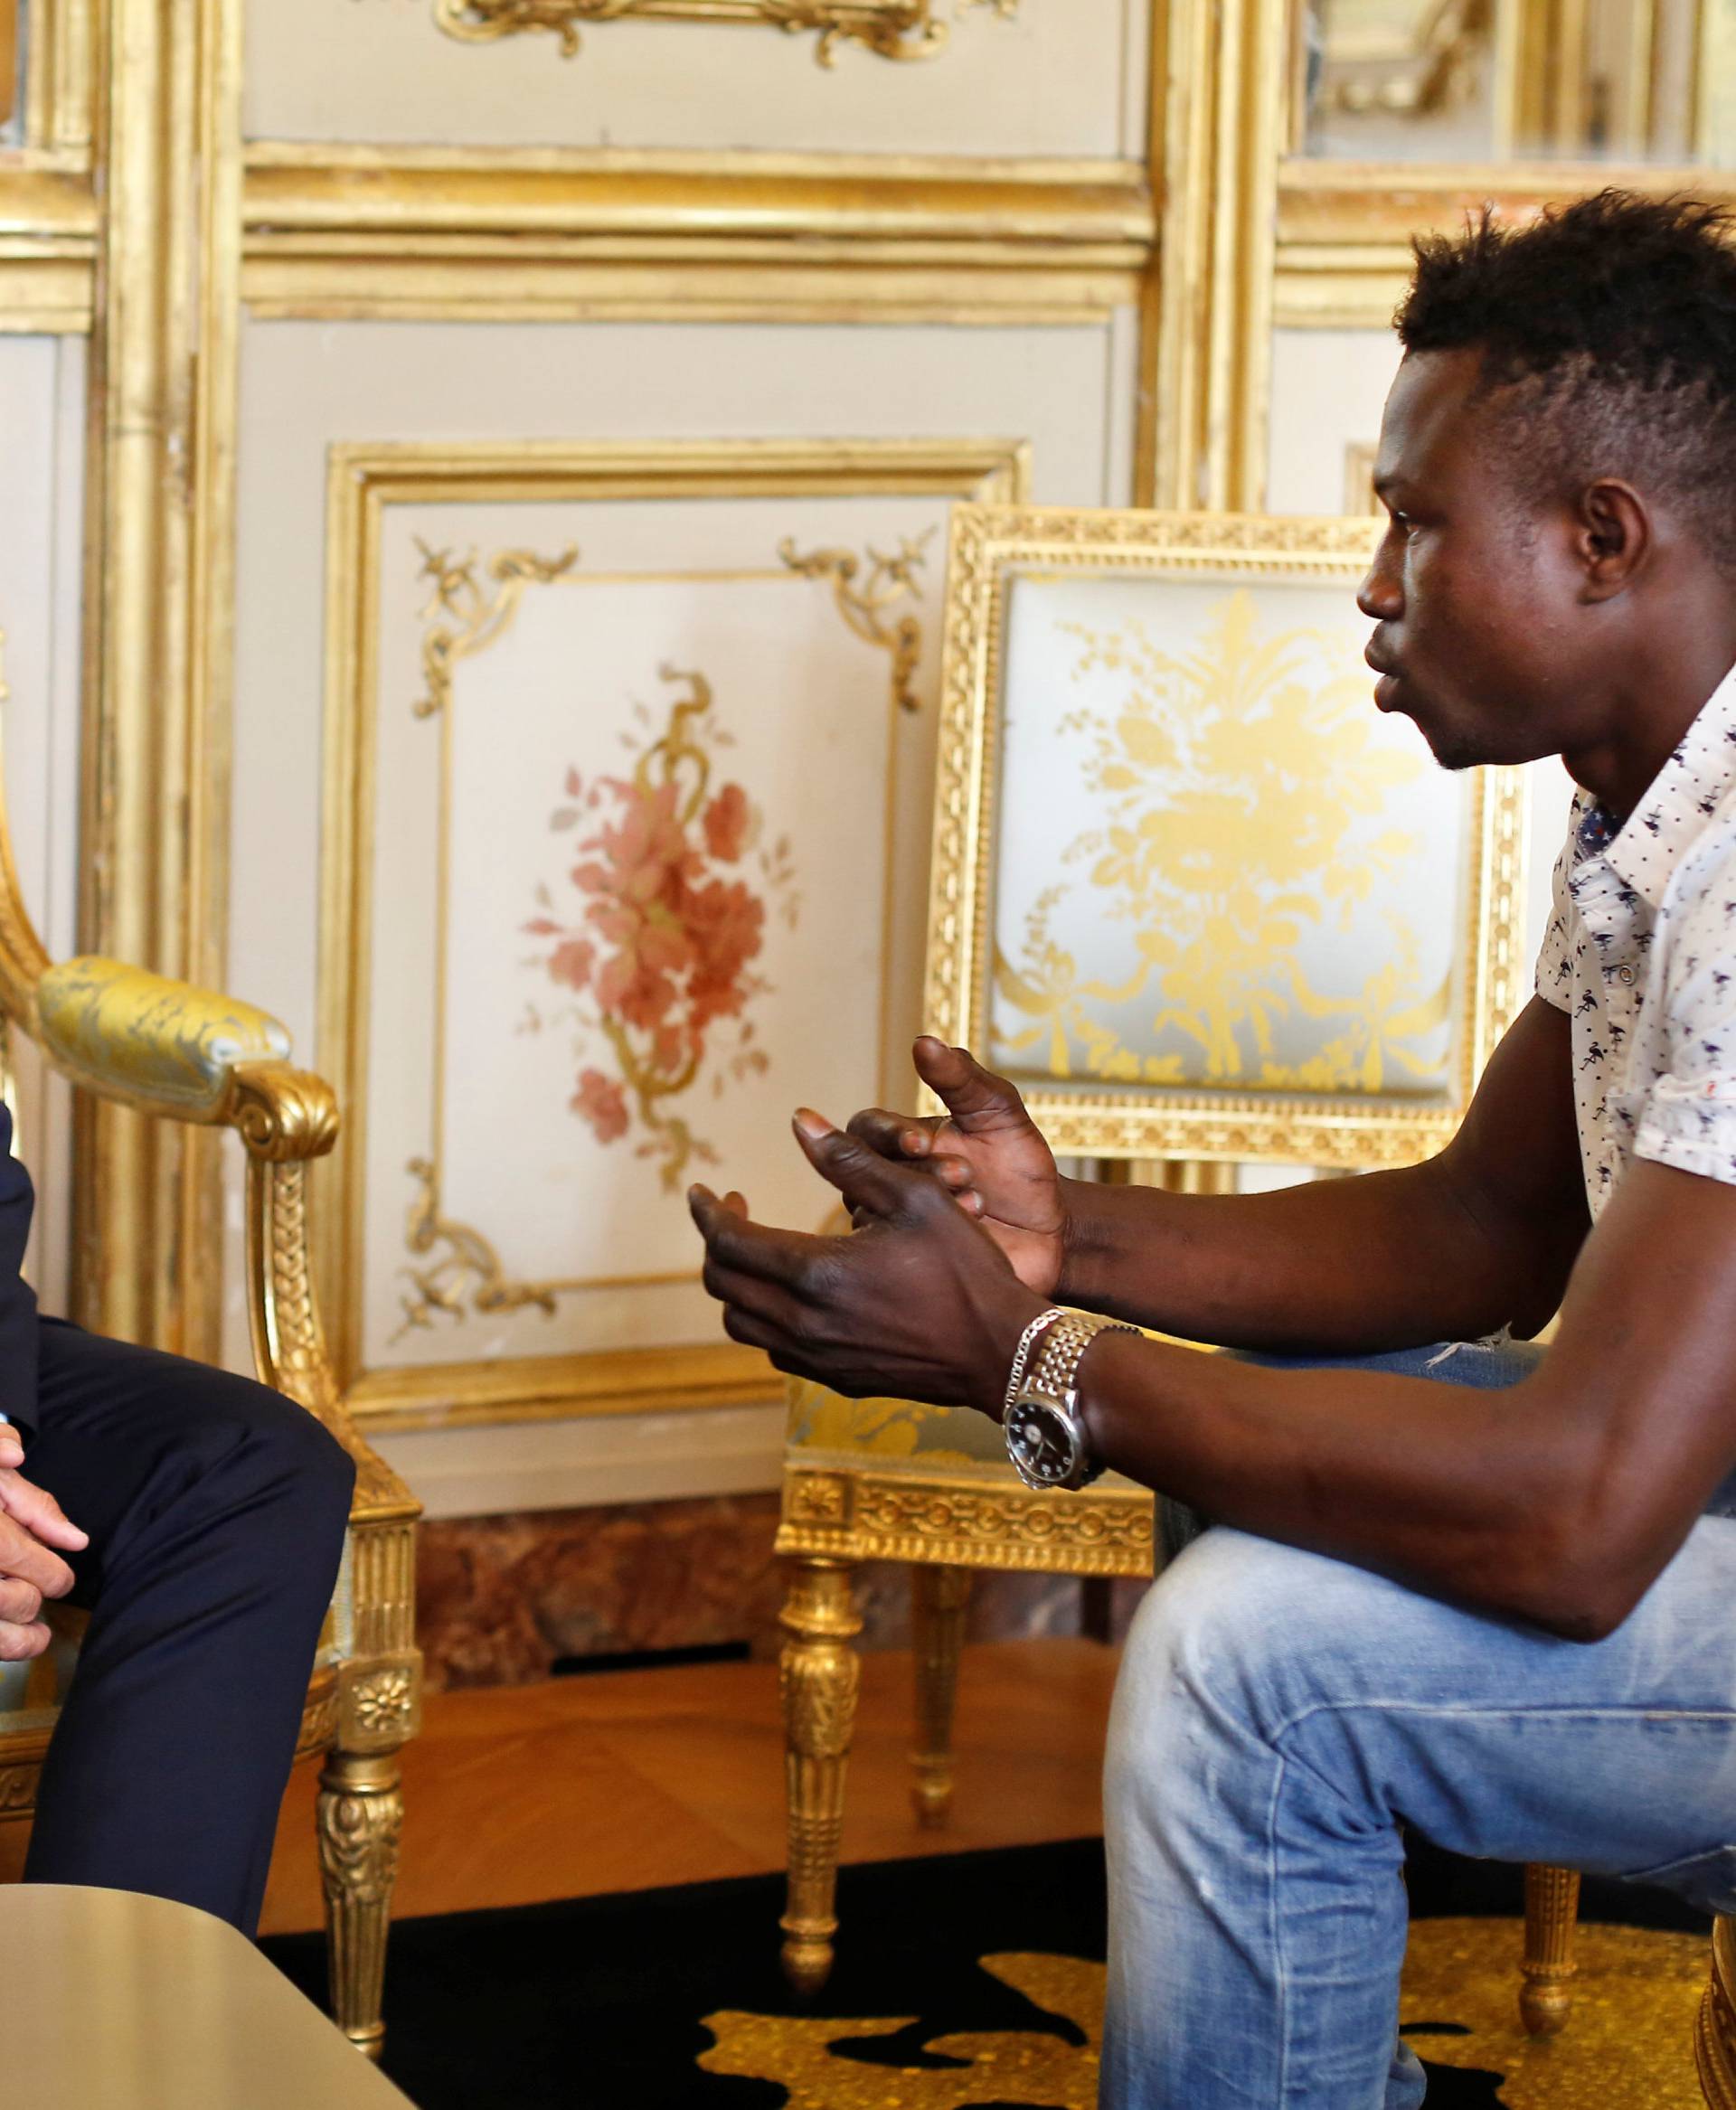 French President Emmanuel Macron meets with Mamoudou Gassama, 22, from Mali, at the Elysee Palace in Paris